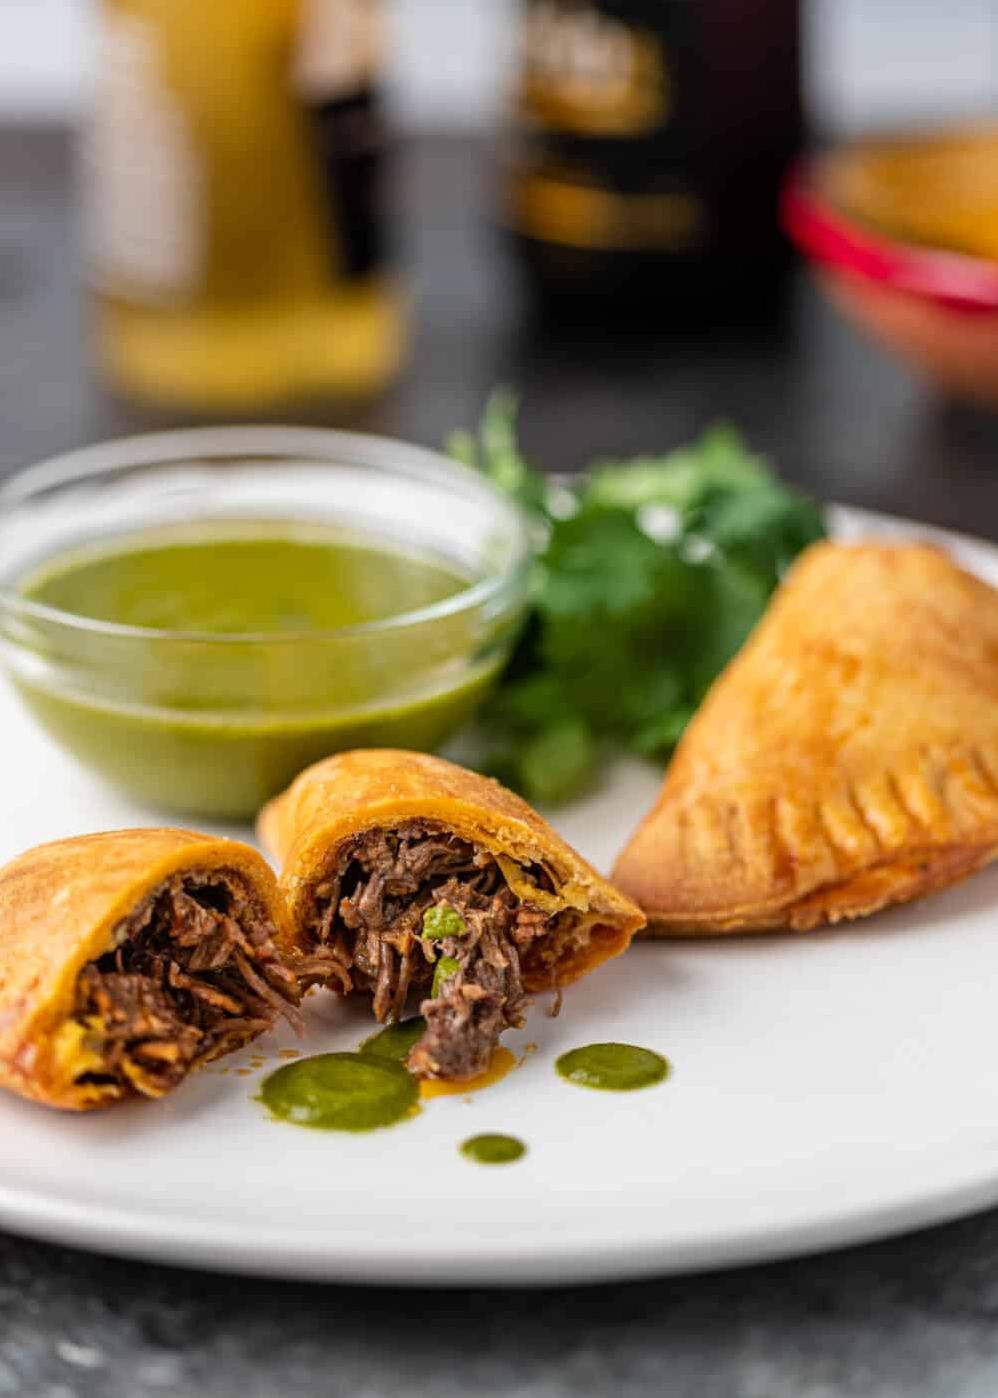  Perfect for a snack or a meal, these empanadas are irresistible!